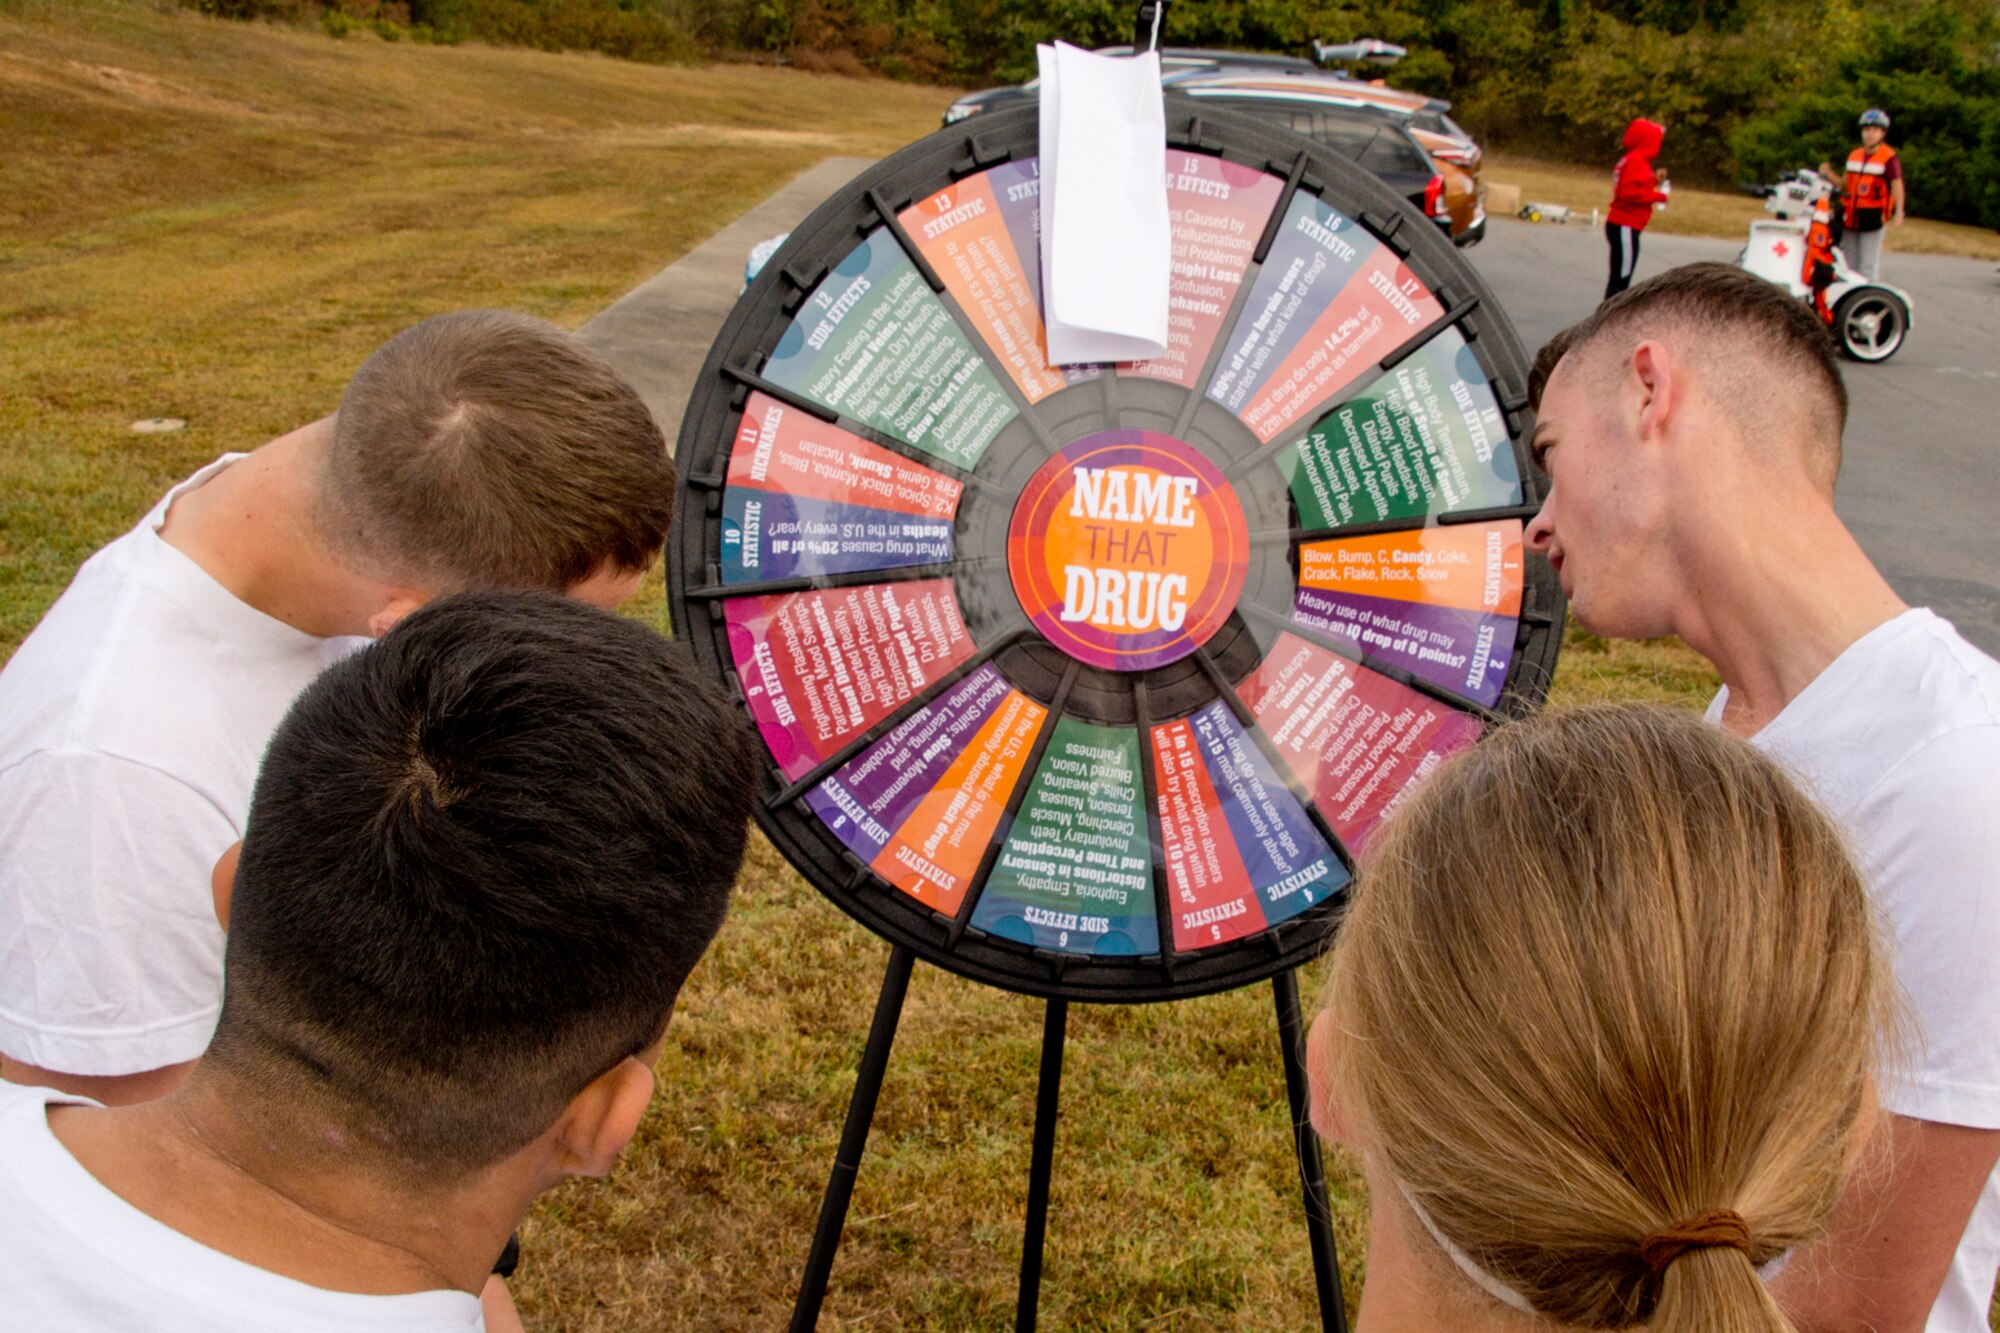 Runners test their knowledge at the “Name That Drug” wheel before the 5K Color Run at Little Rock Air Force Base, Ark., Oct. 20, 2017.